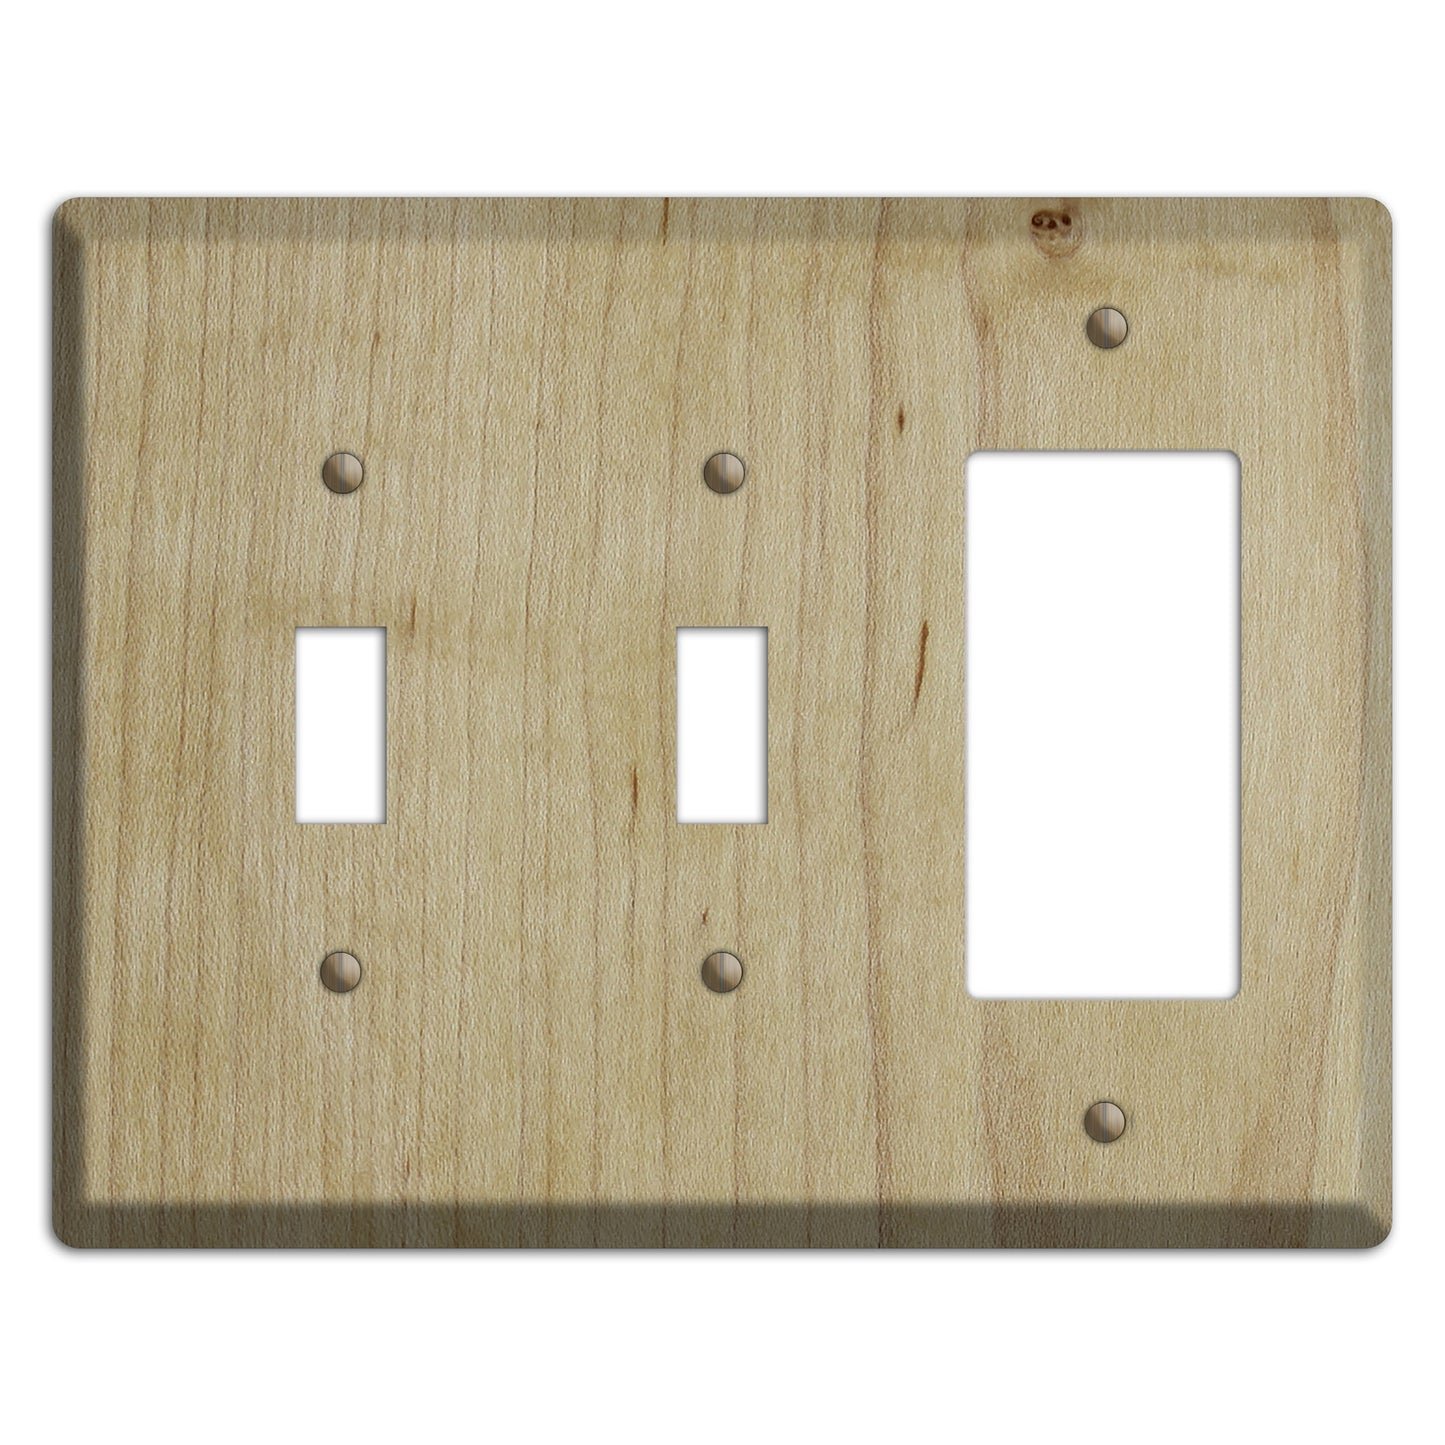 Maple Wood 2 Toggle / Rocker Cover Plate